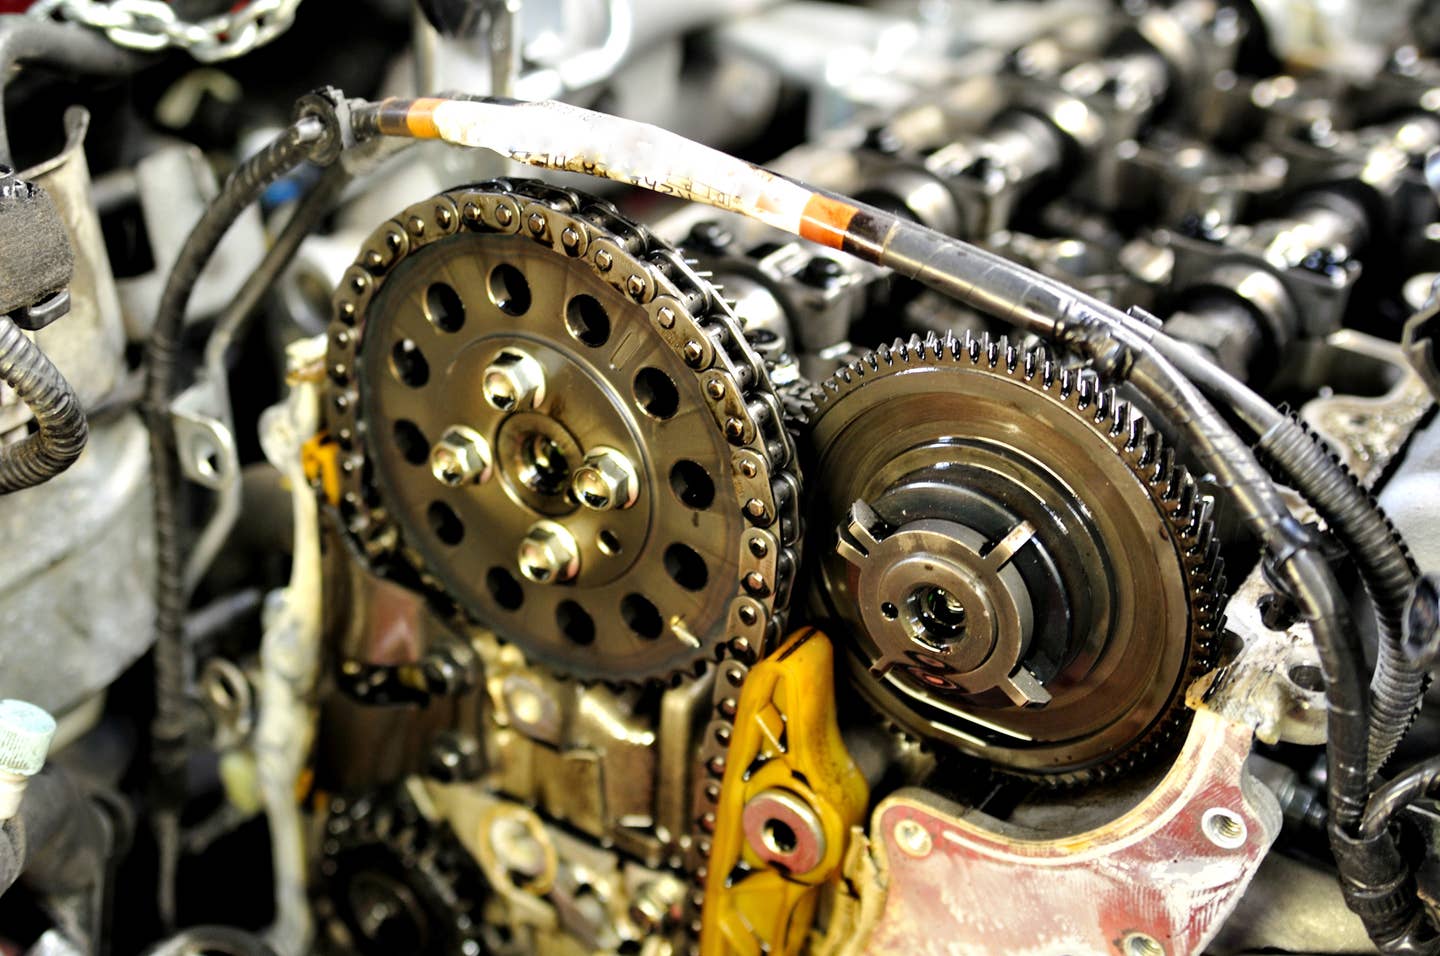 A timing chain.